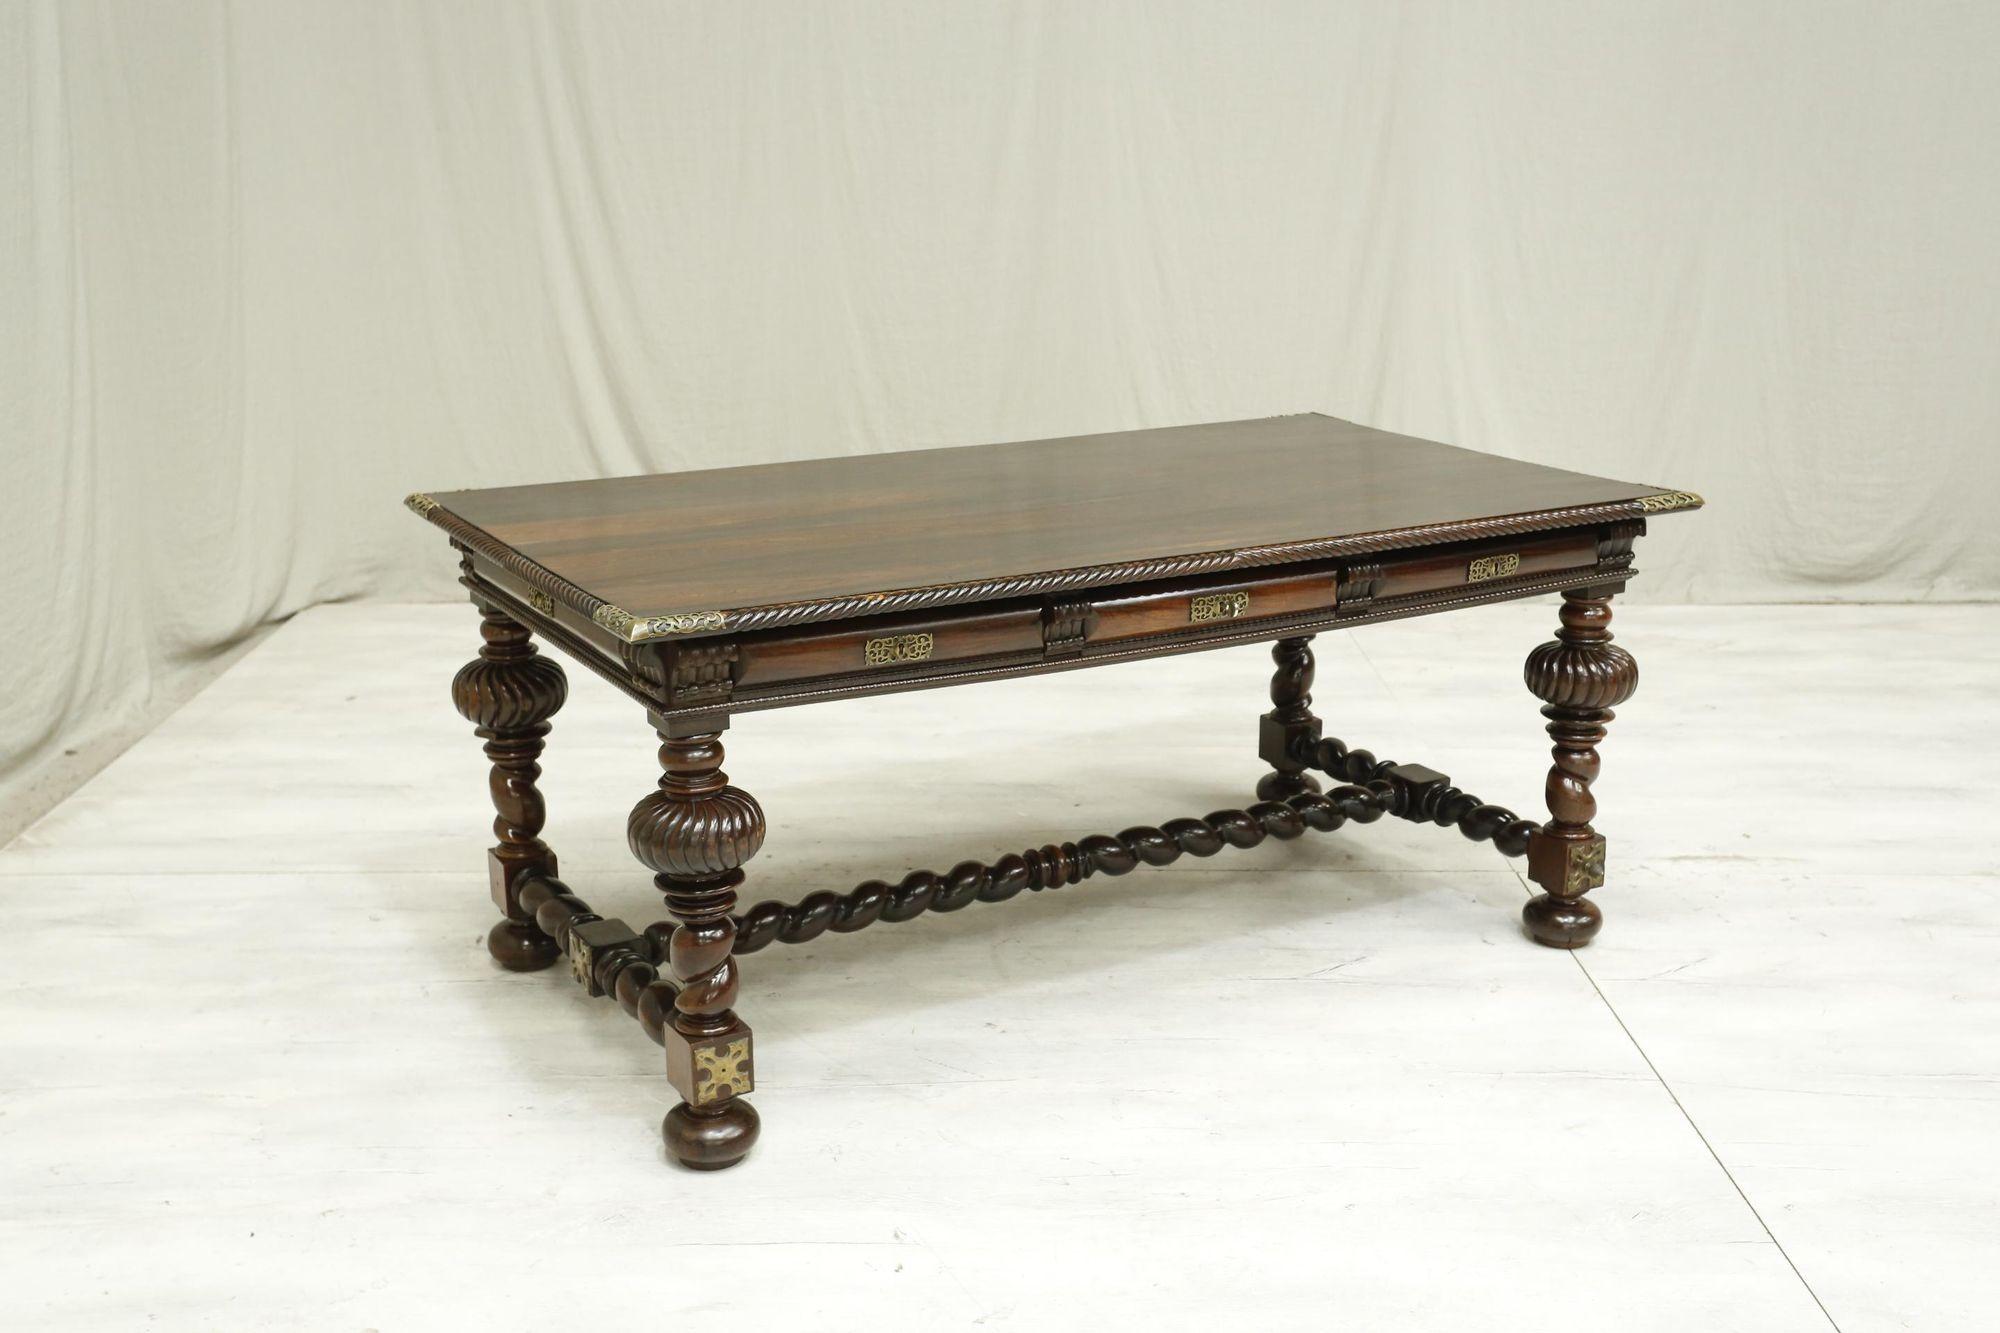 This is a truly exceptional quality 19th century solid Rosewood desk. It is Portuguese in origin and has a striking design that will give the piece a real presence in any room. The Rosewood has incredible figuring and the fact is it solid timber